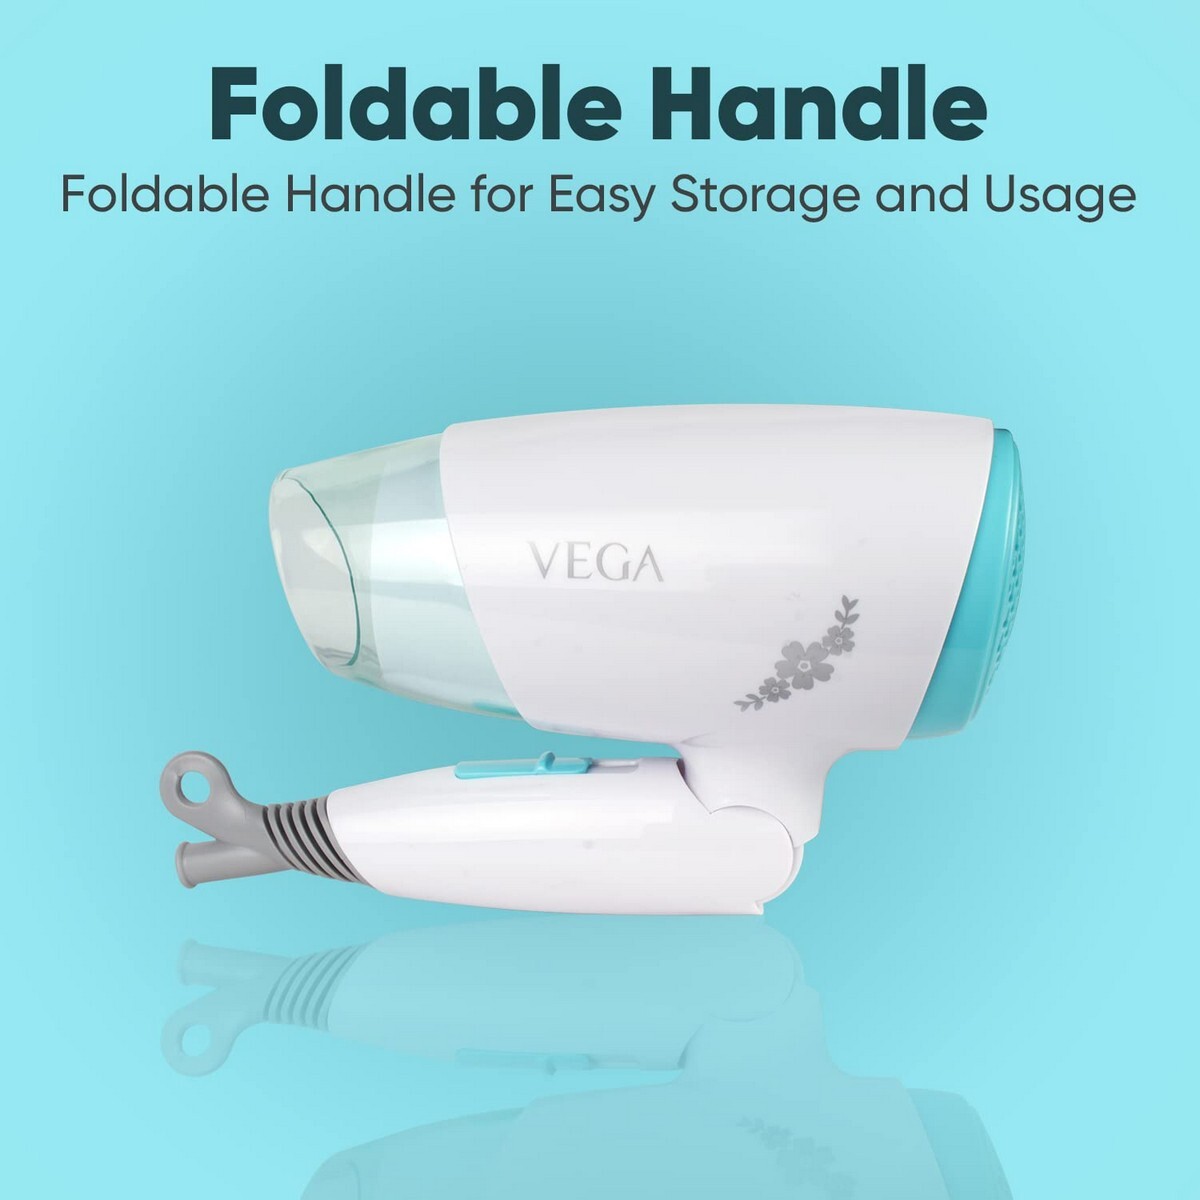 VEGA Insta Look 1400 Watts Foldable Hair Dryer with Cool Shot Button & 3 Heat/Speed Settings VHDH-23